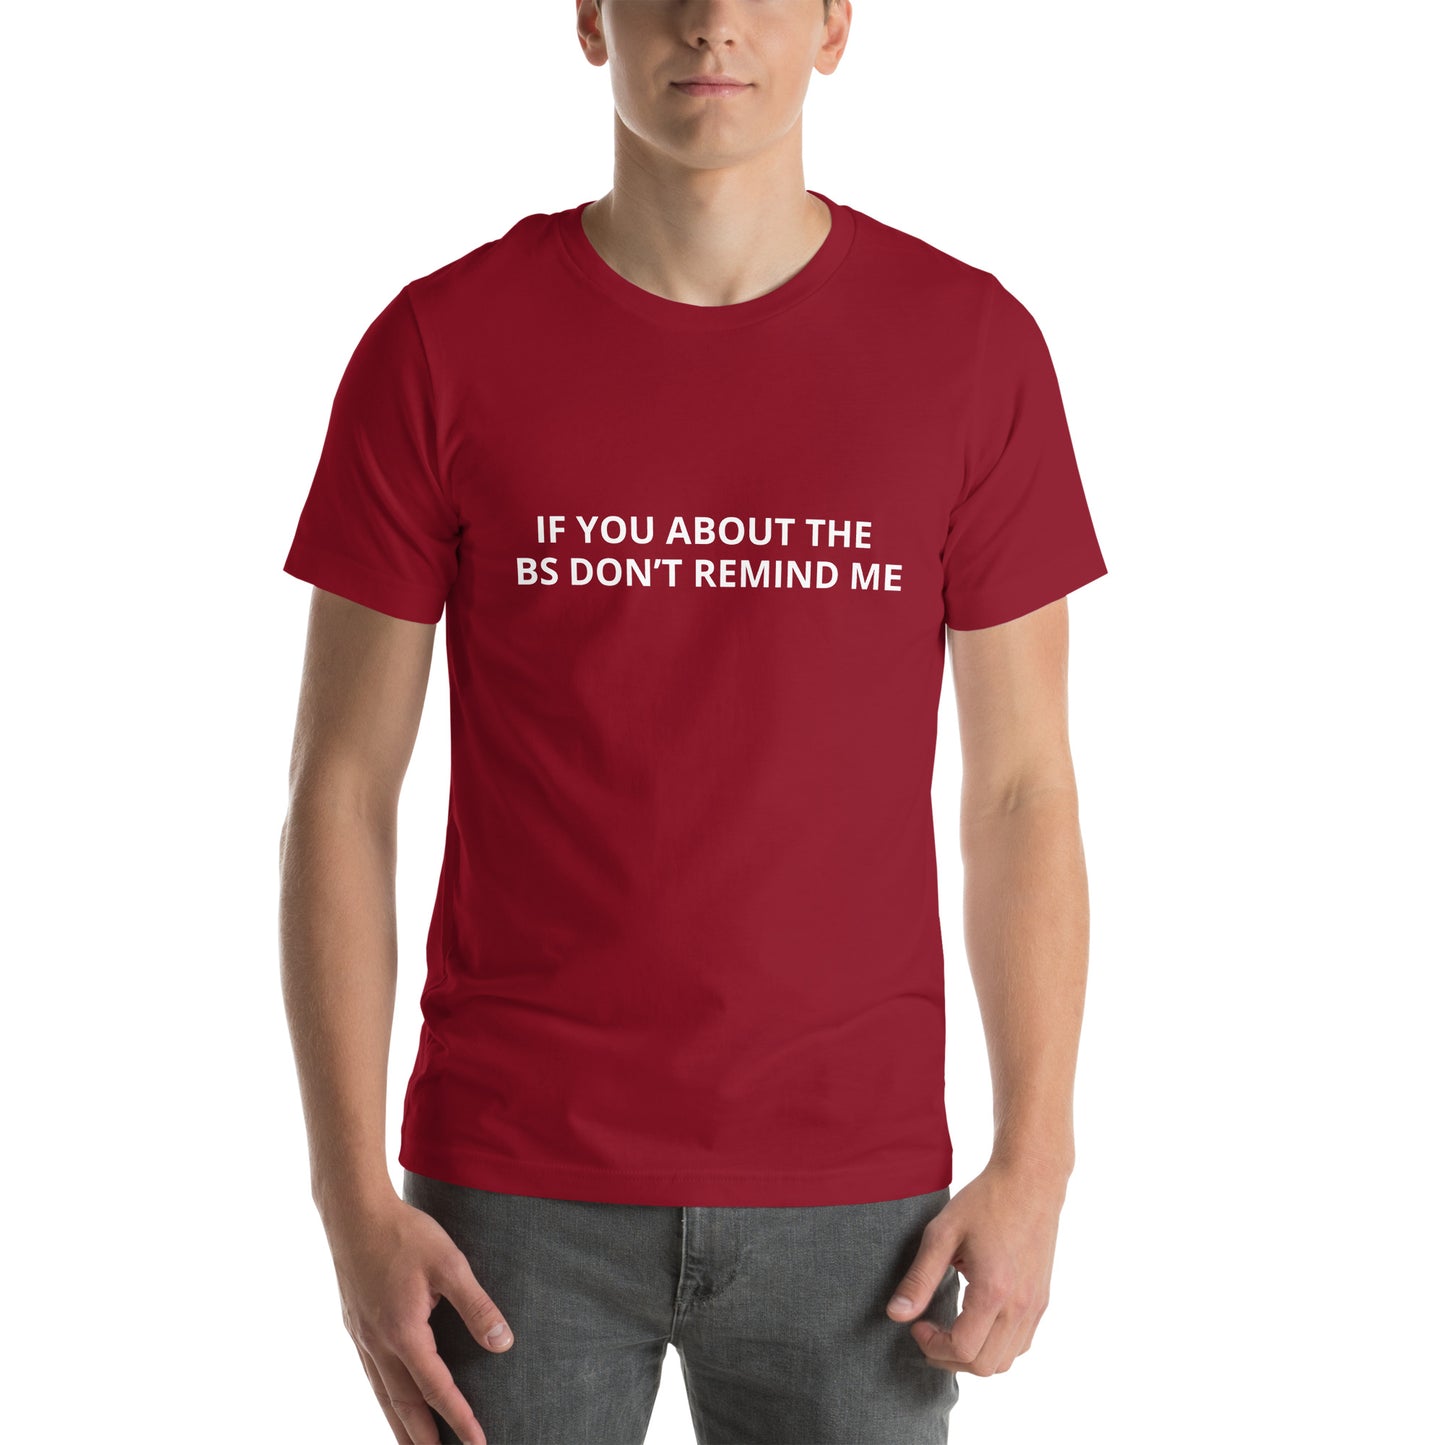 IF YOU ABOUT THE BS DON’T REMIND ME  Unisex t-shirt